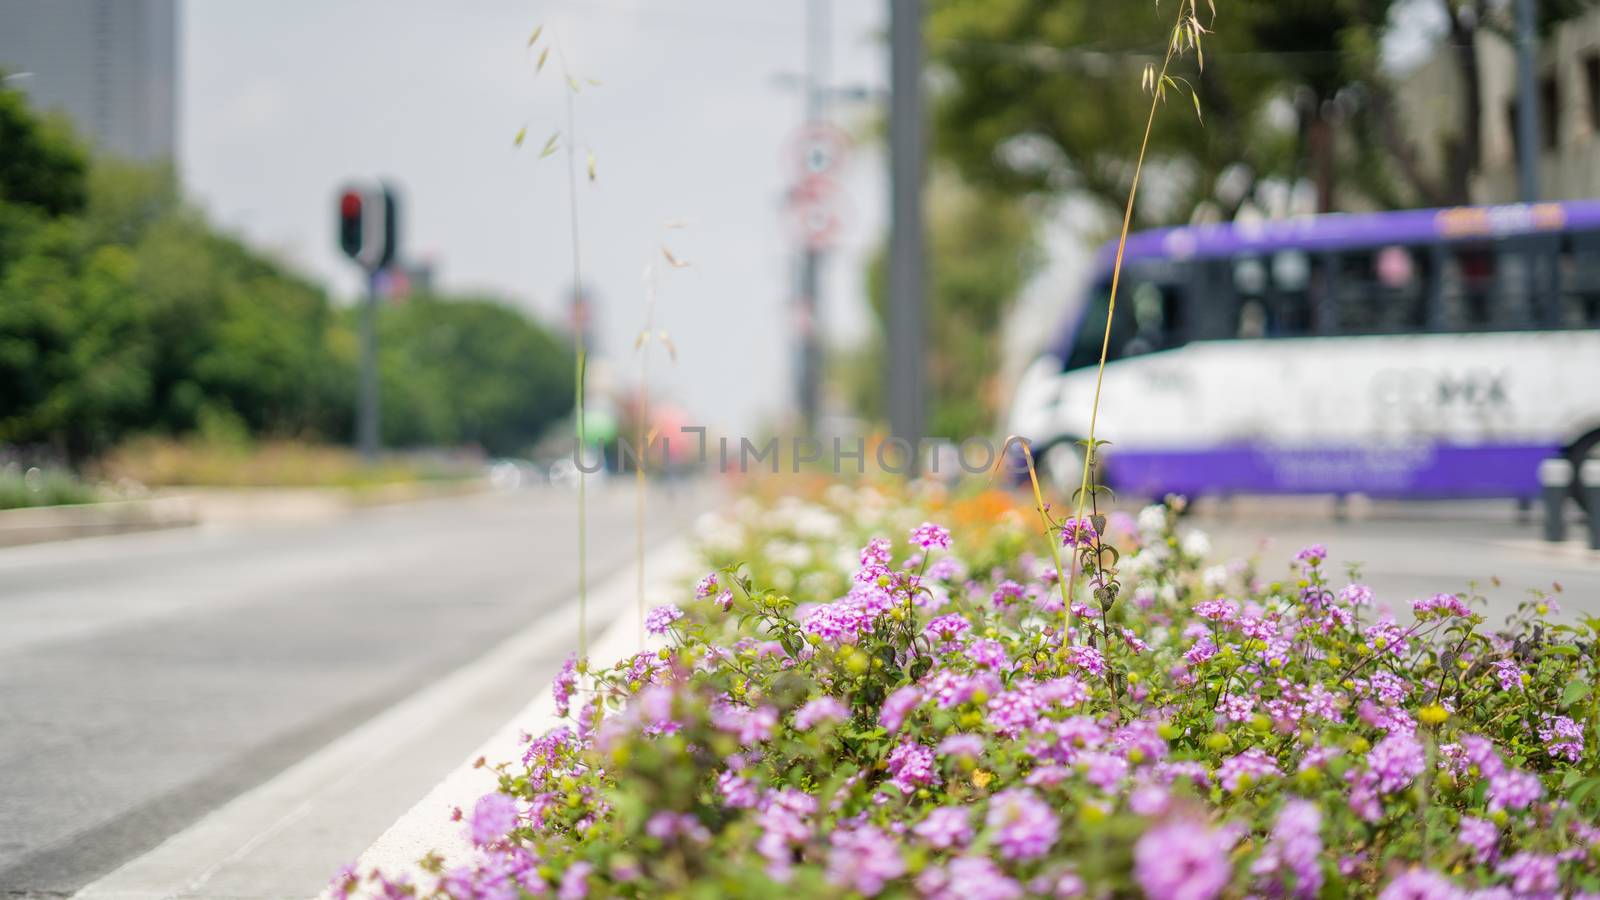 Picture of purple flowers in a large avenue while a blurry purple bus passes in the background